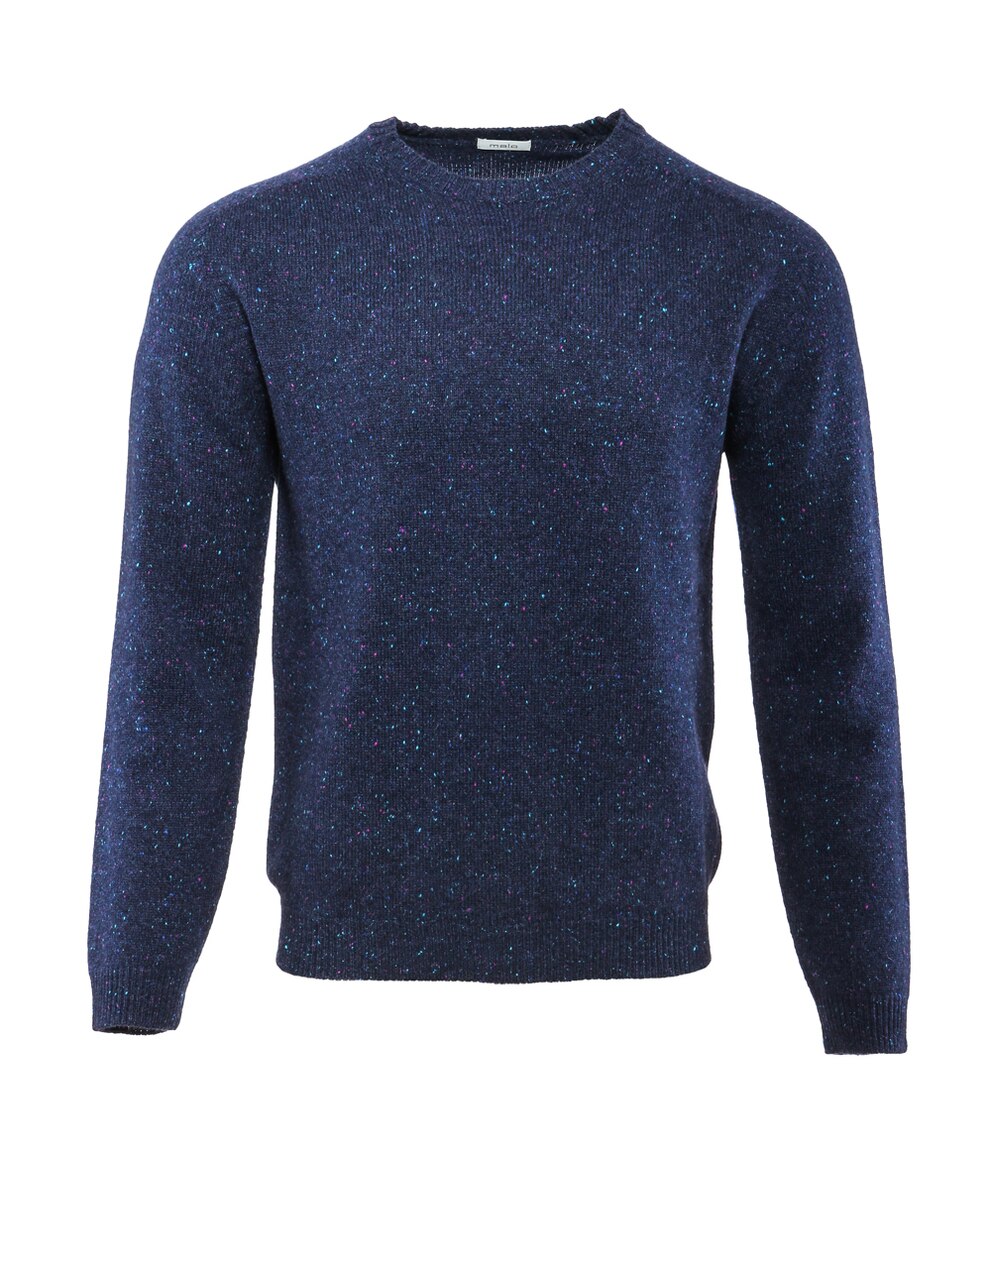 Malo Cashmere Sweaters for Men - Avalon Clothing Company